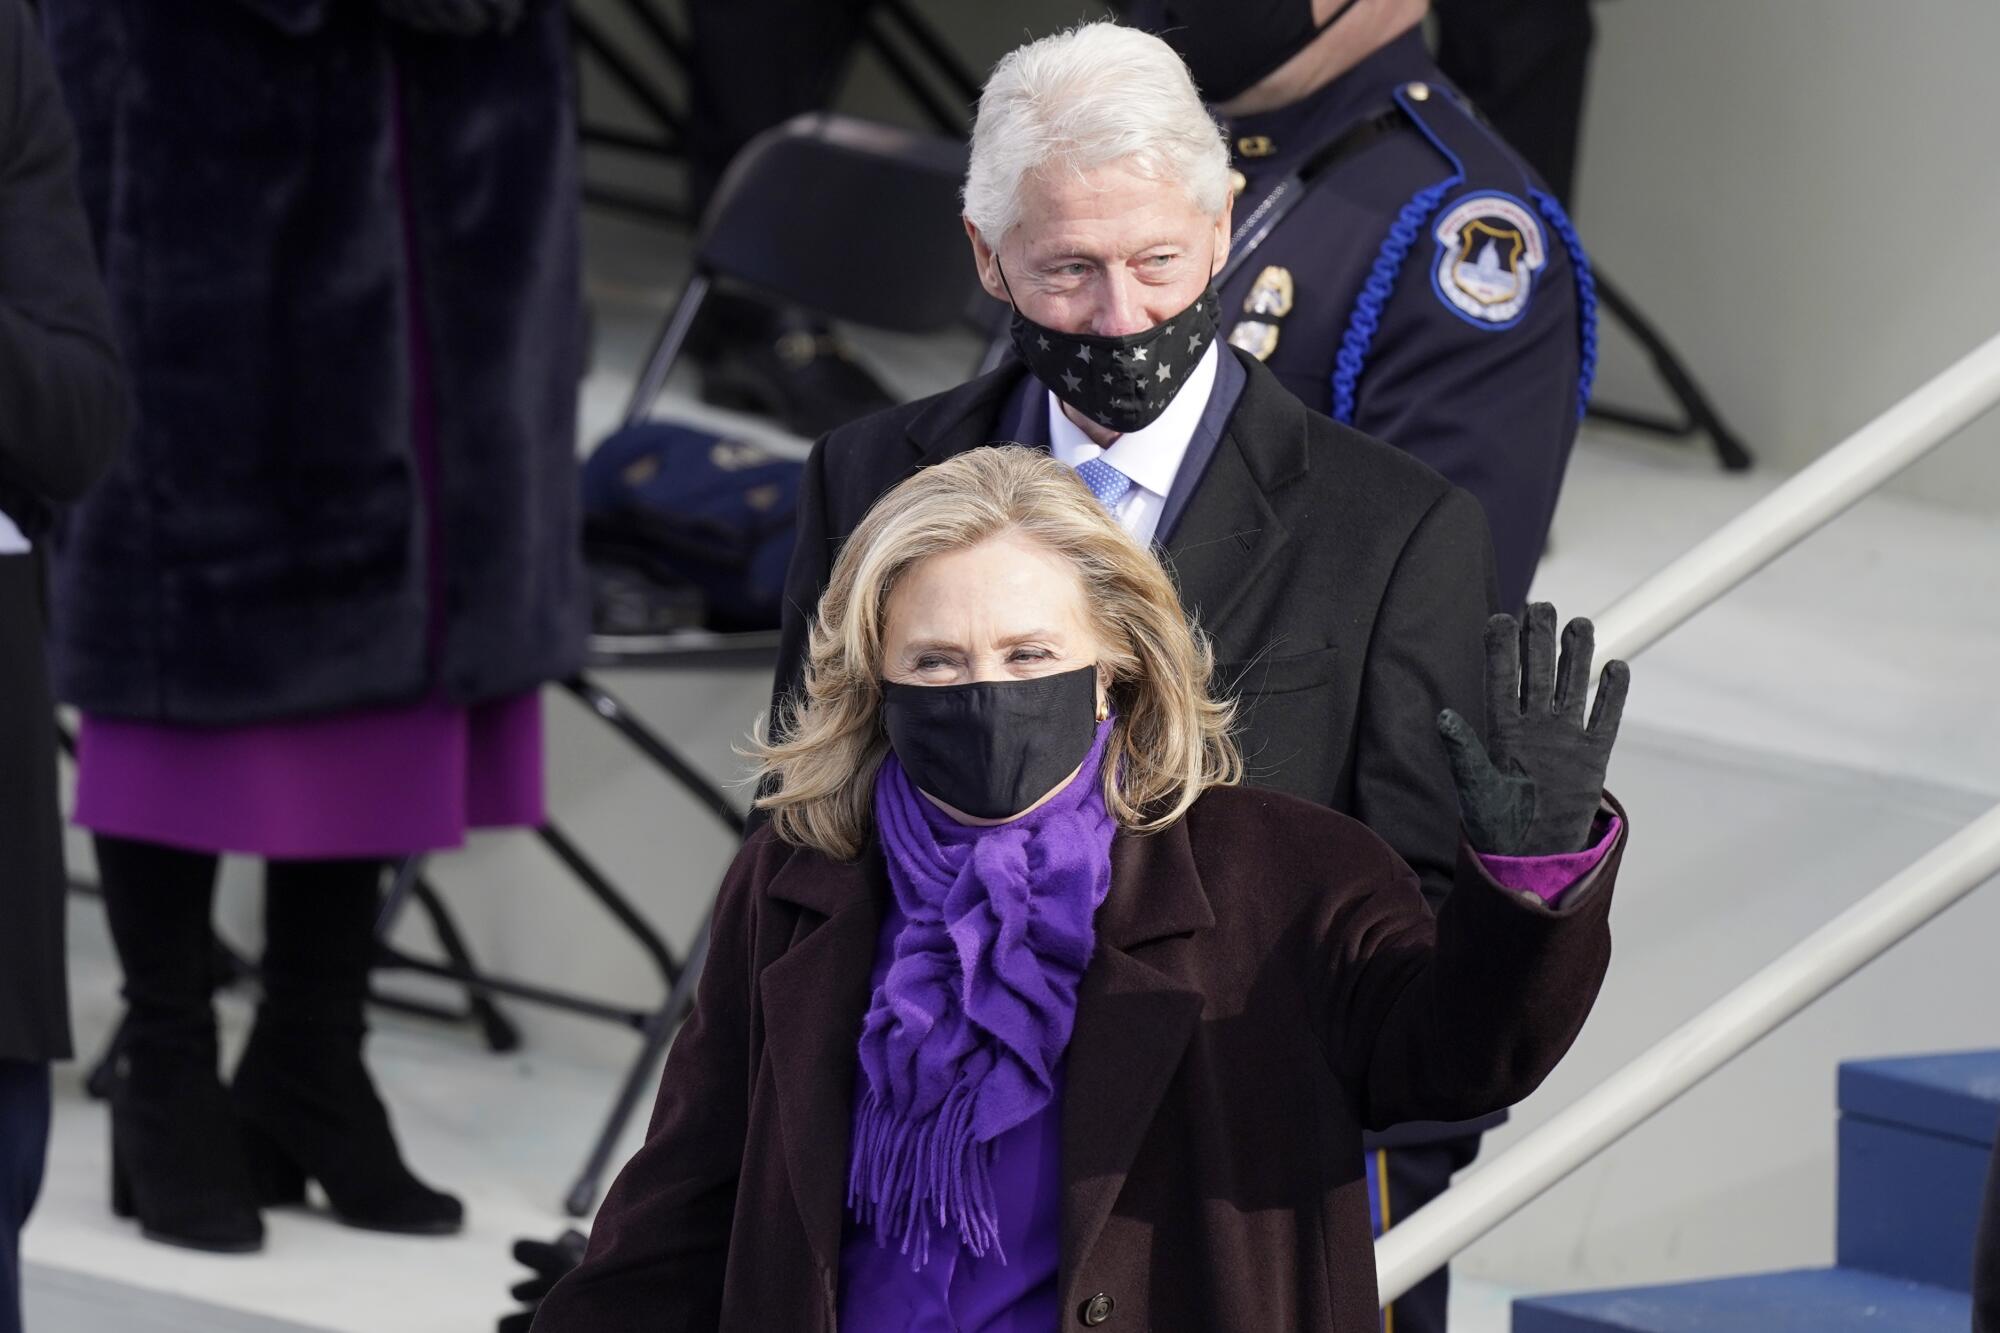 Former President Clinton with former Secretary of State Hillary Clinton at inauguration of President-elect Joe Biden